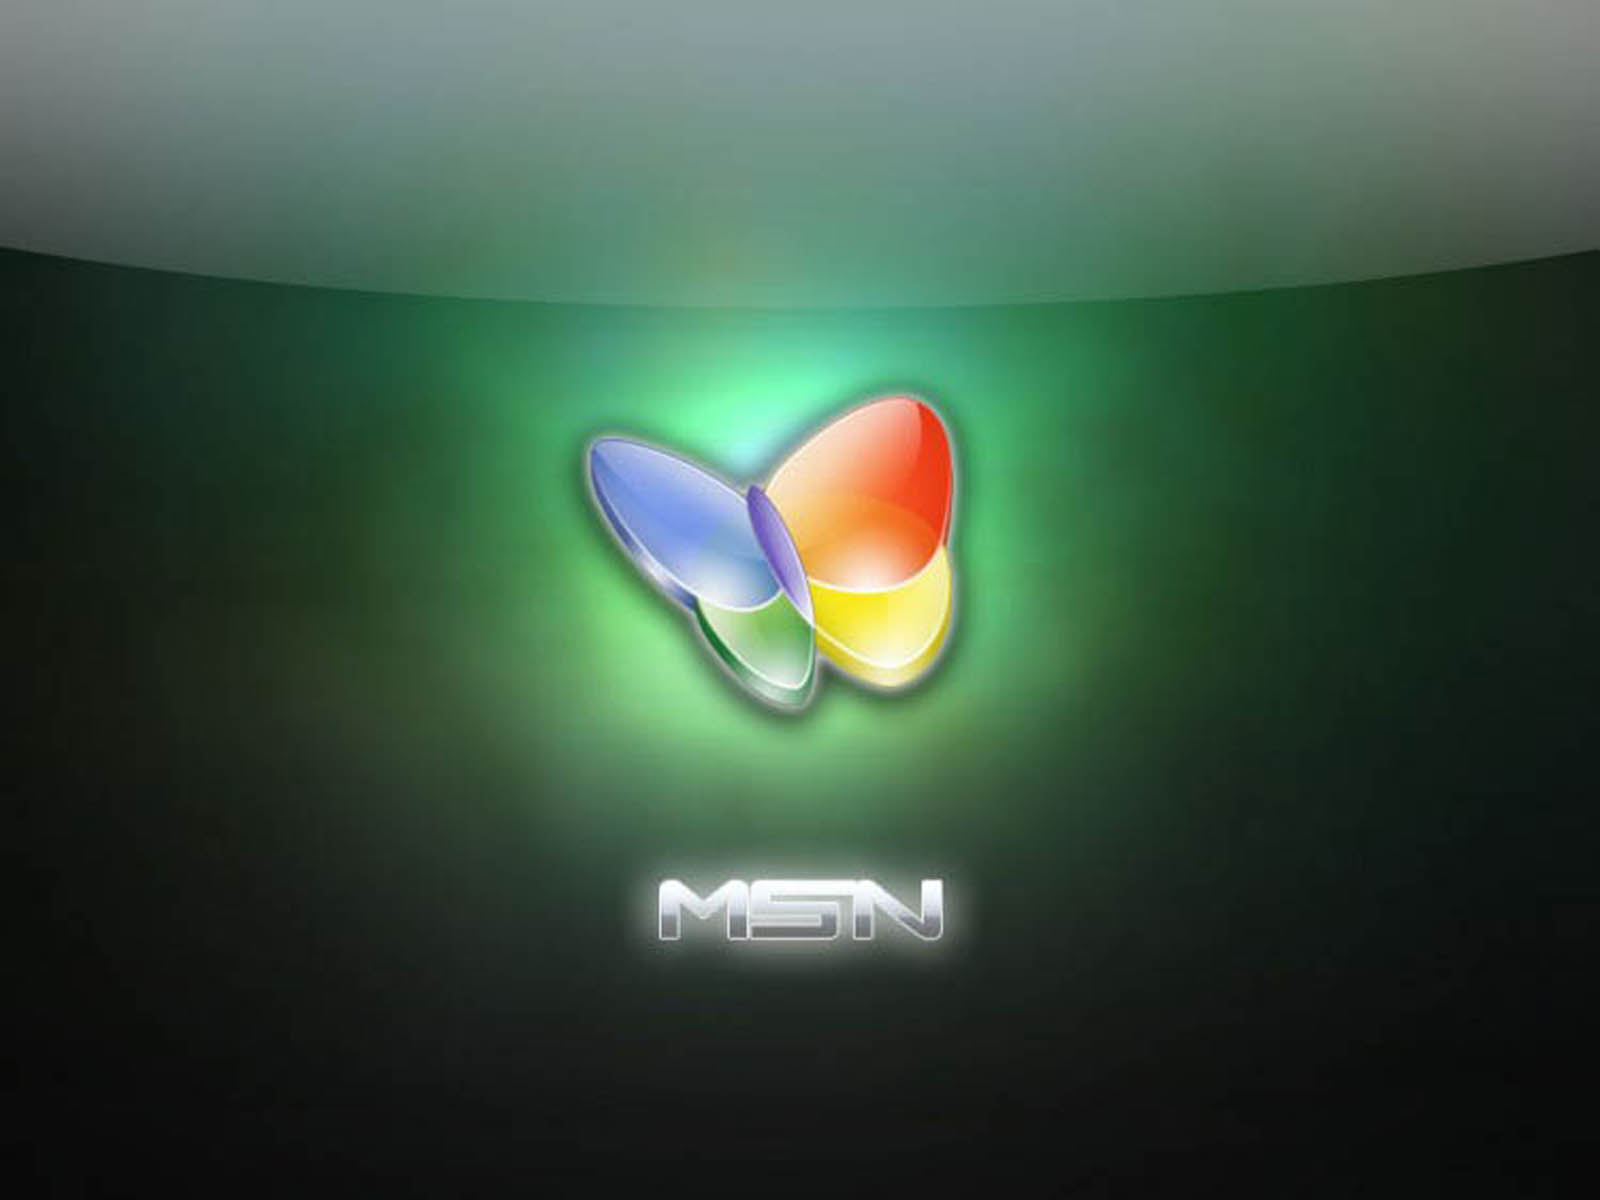 Tag Msn Wallpaper Image Photos Pictures And Background For